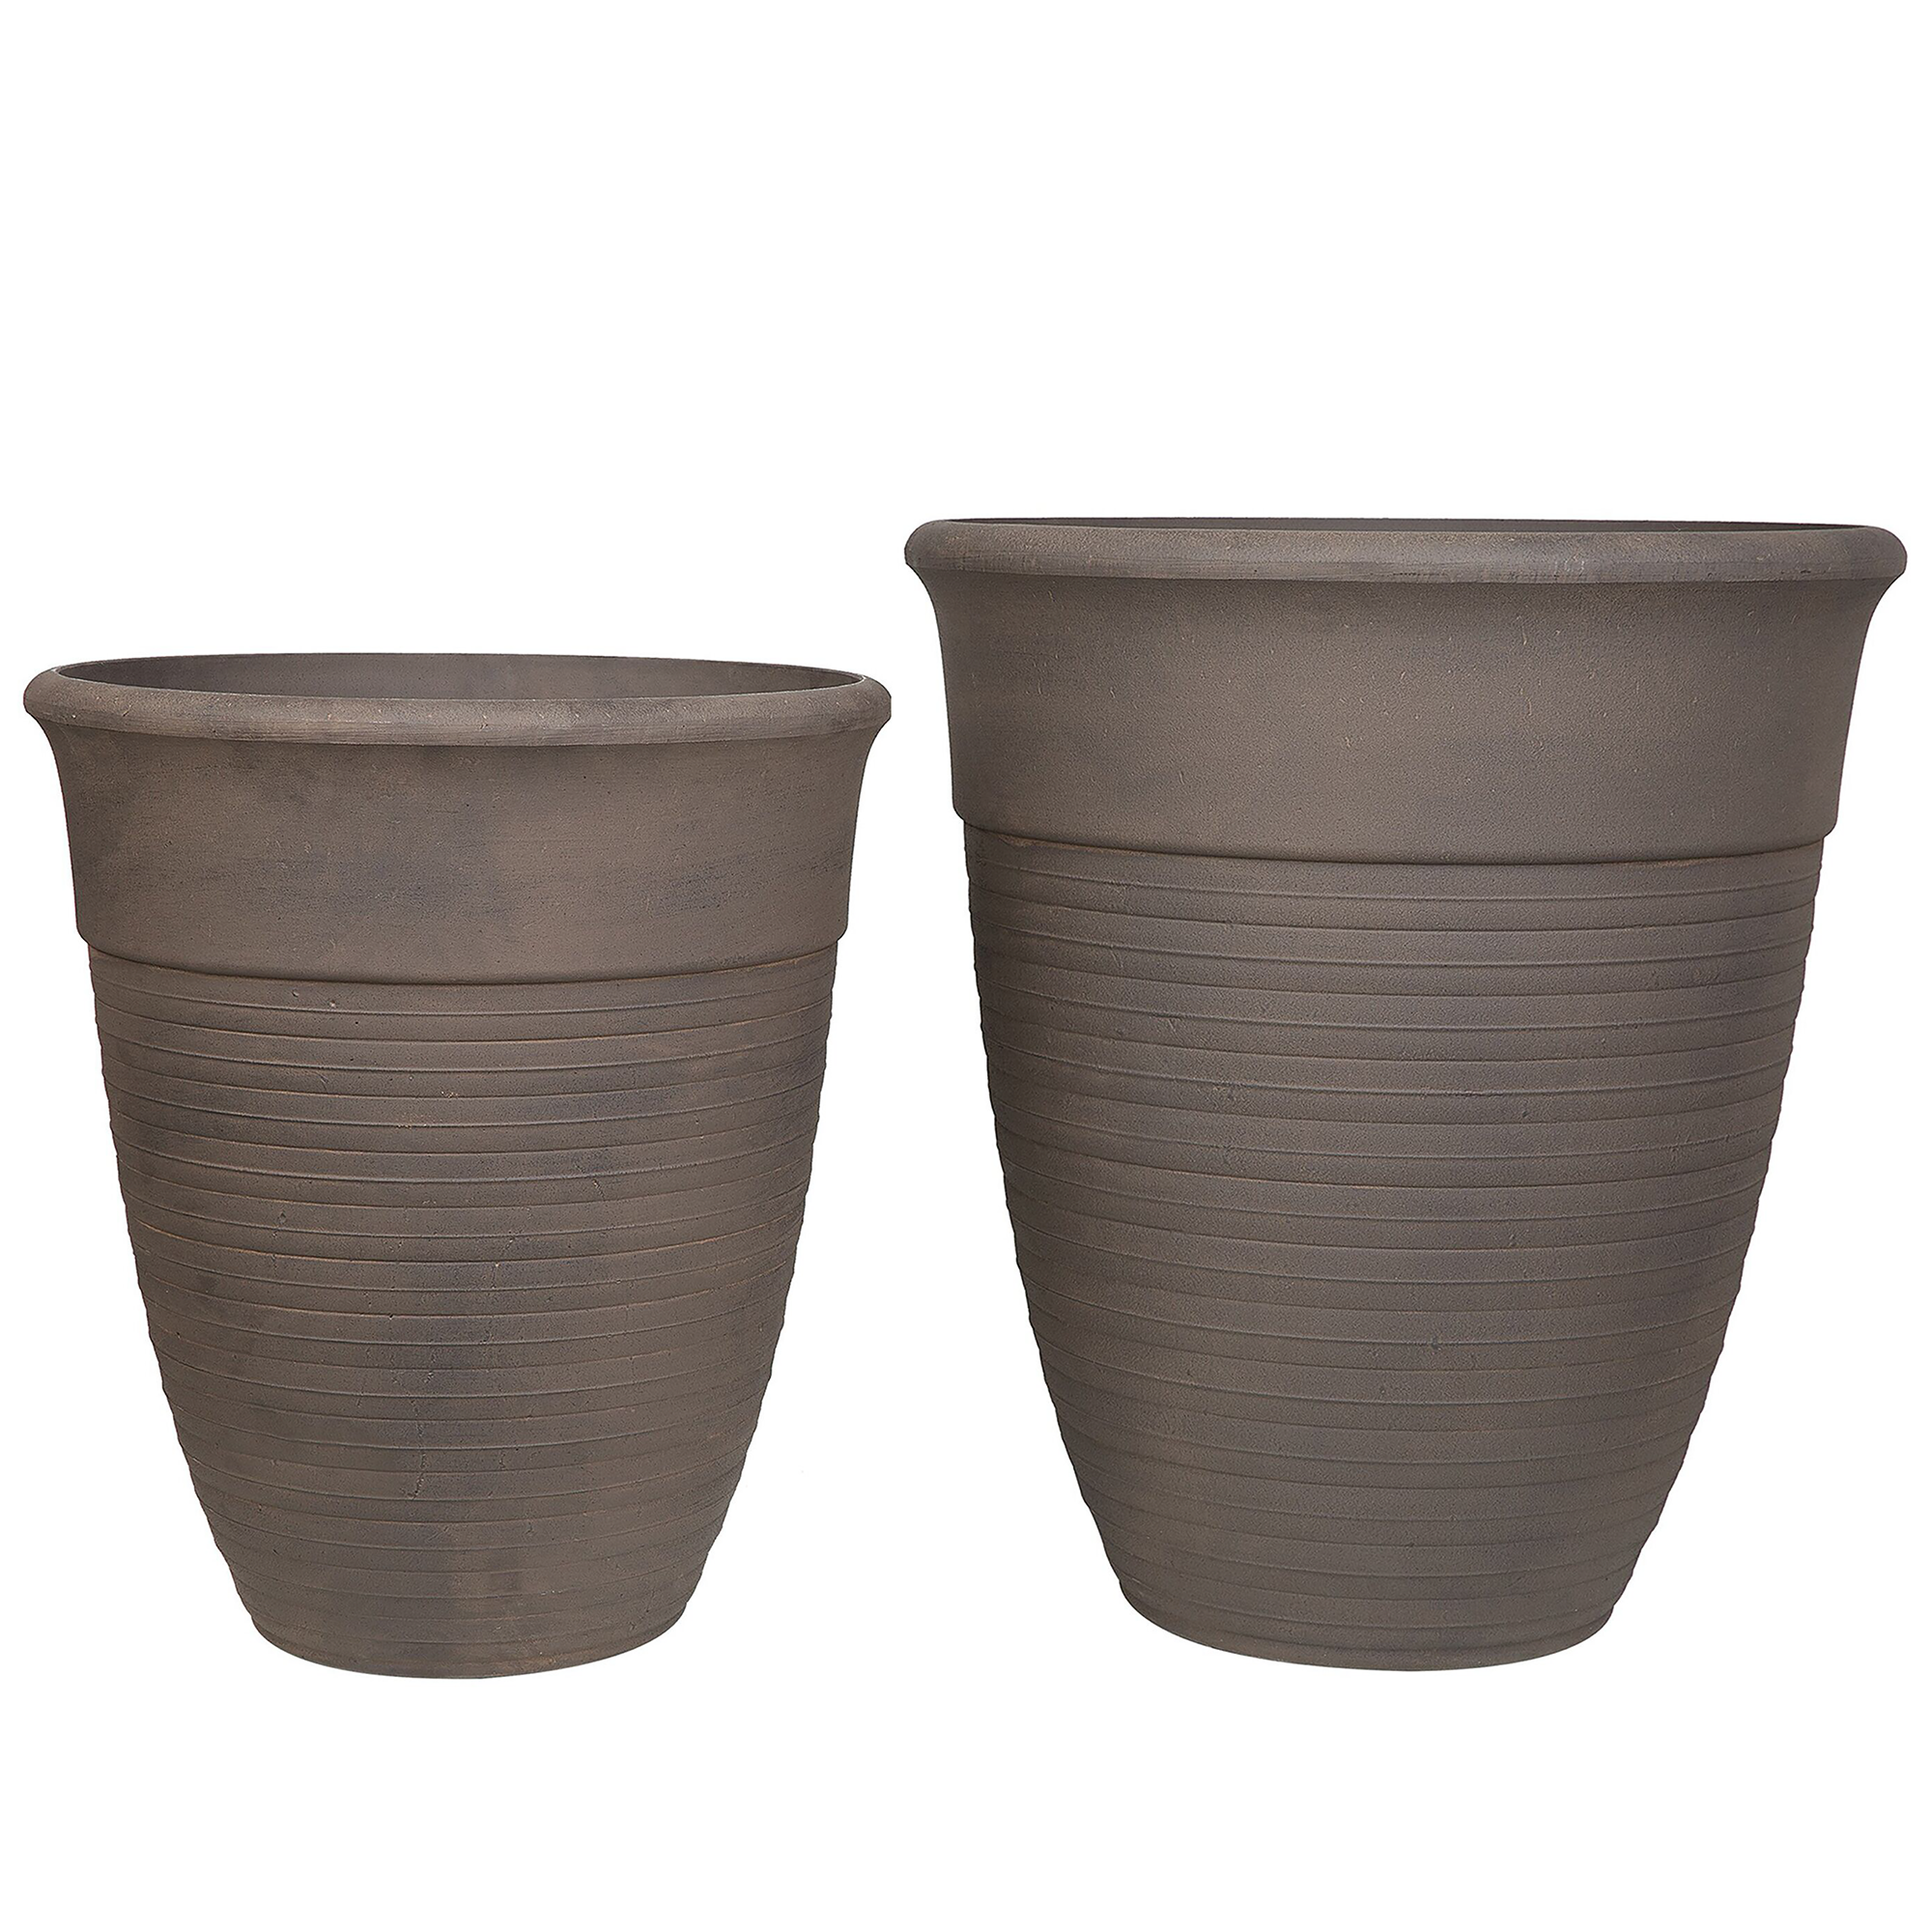 Beliani Set of 2 Plant Pots Planters Solid Brown Stone Mixture Round Various Sizes Outdoor Resistances All-Weather